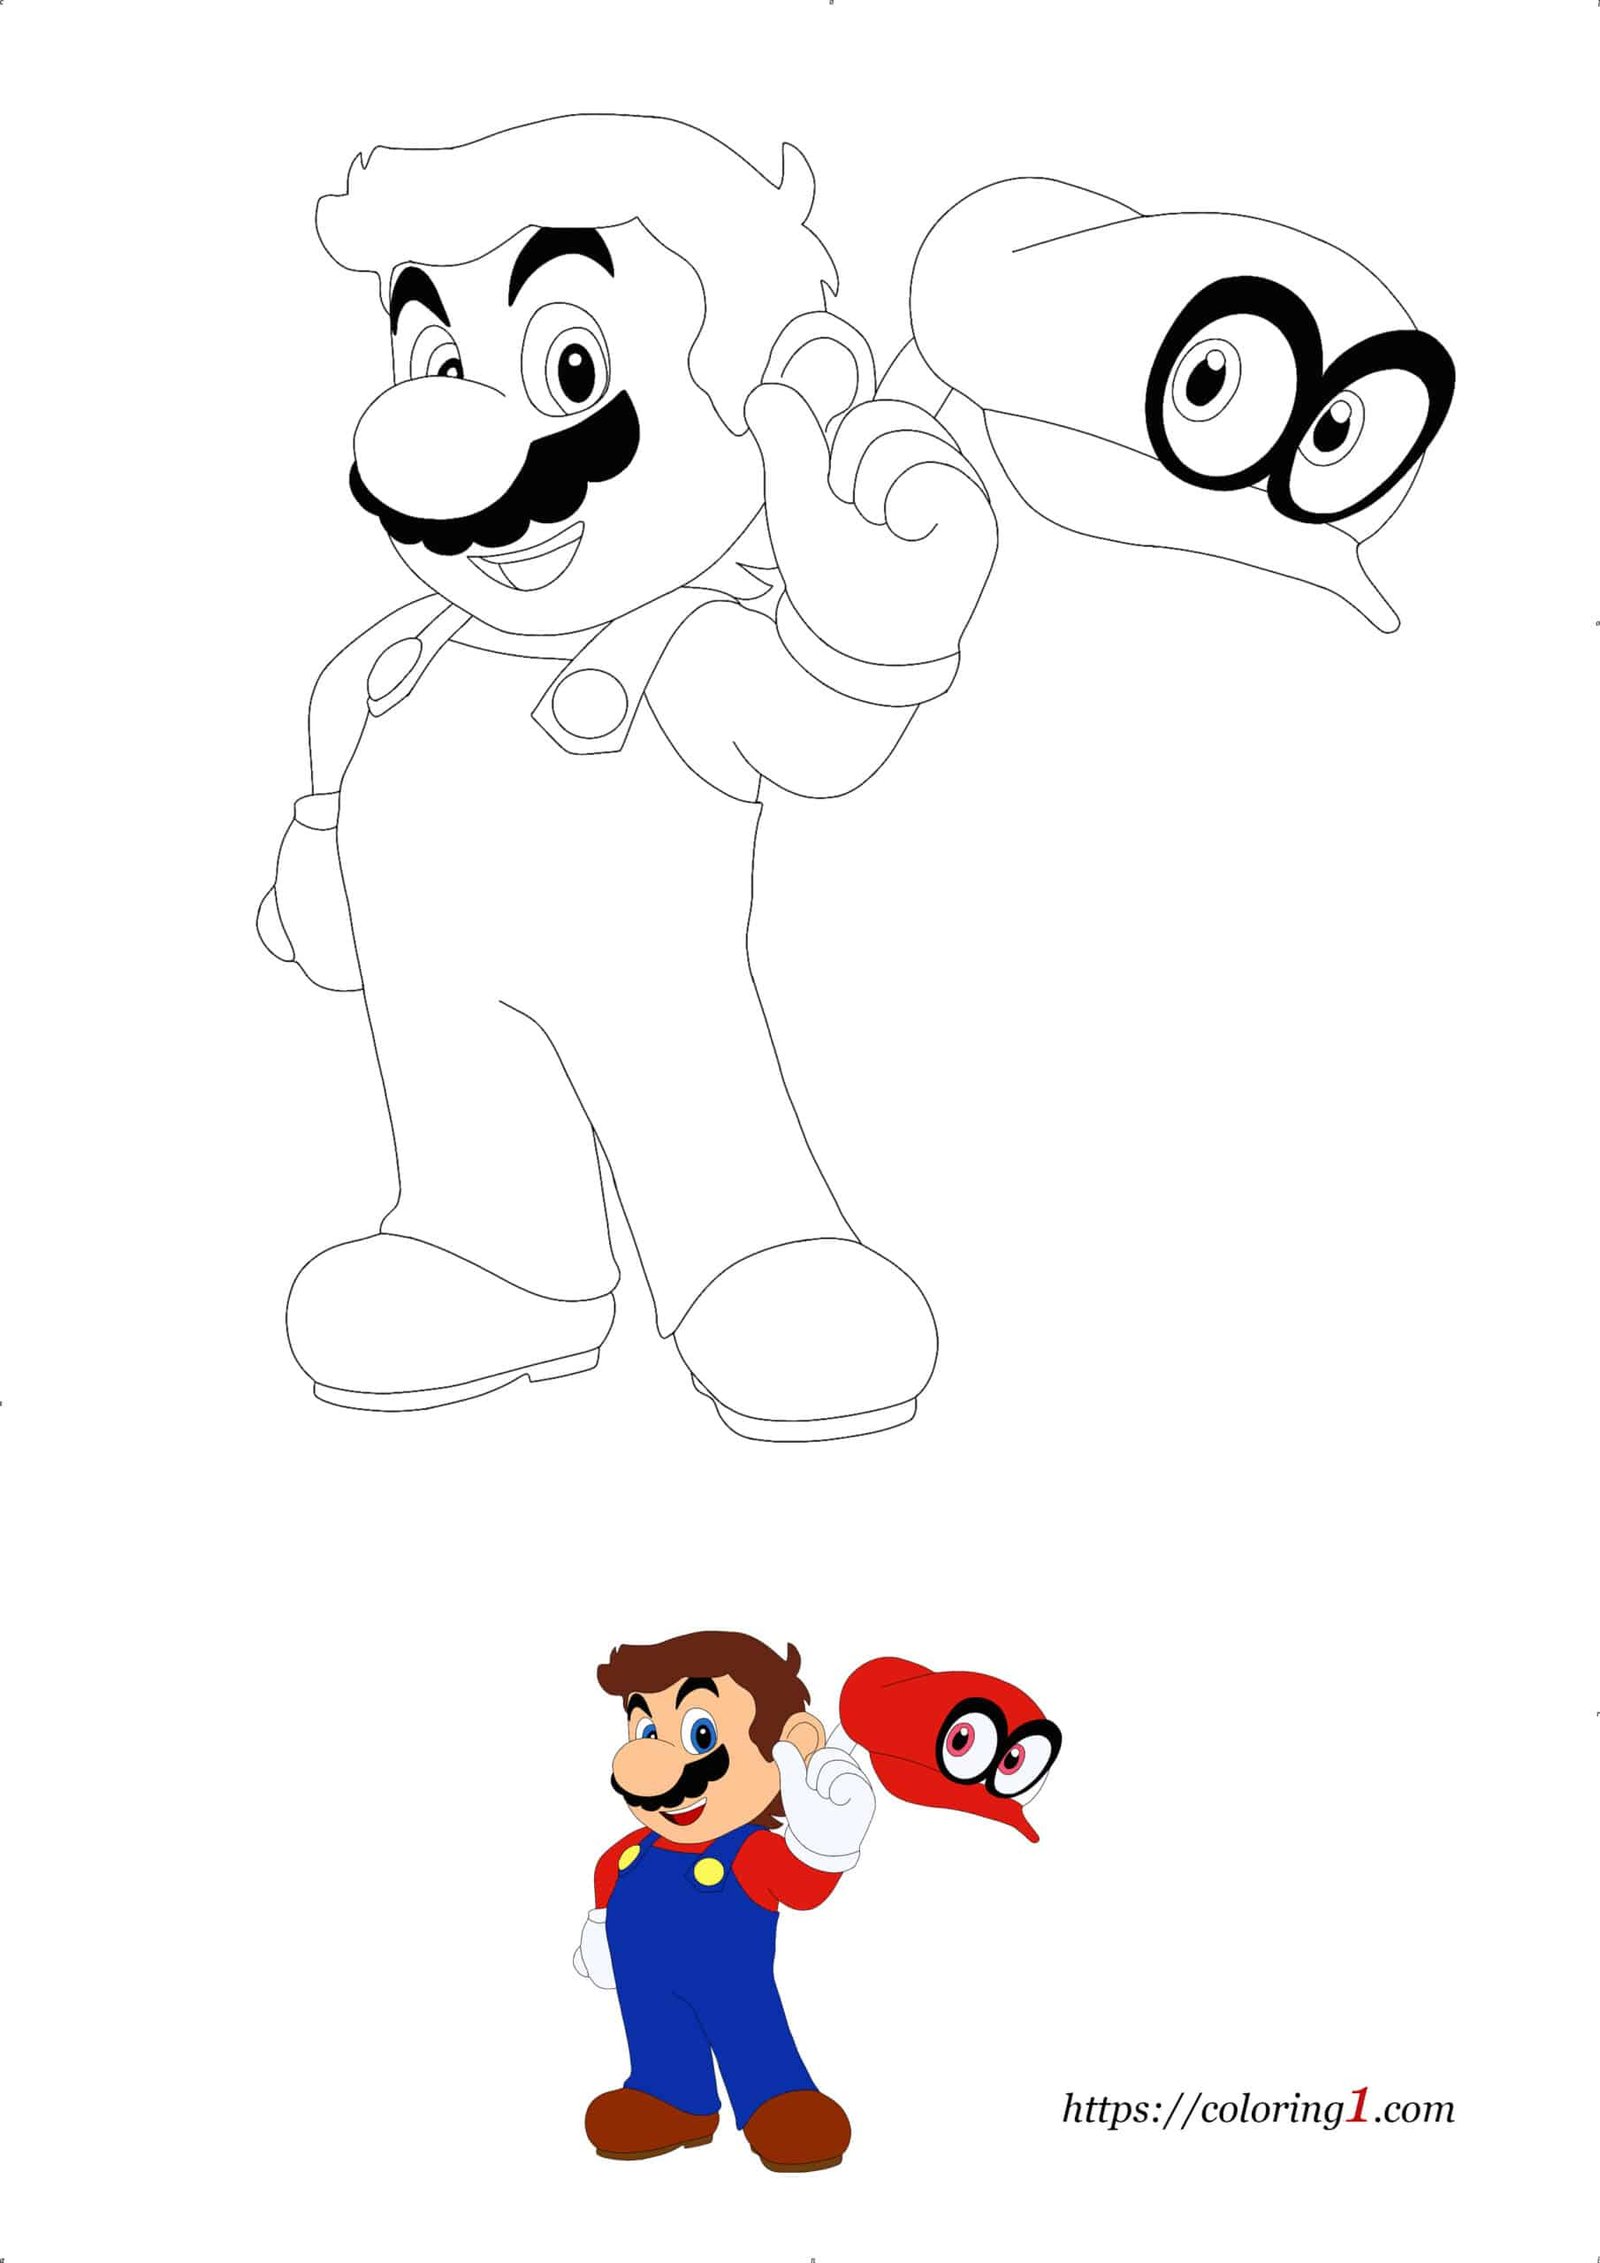 Super mario odyssey coloring pages